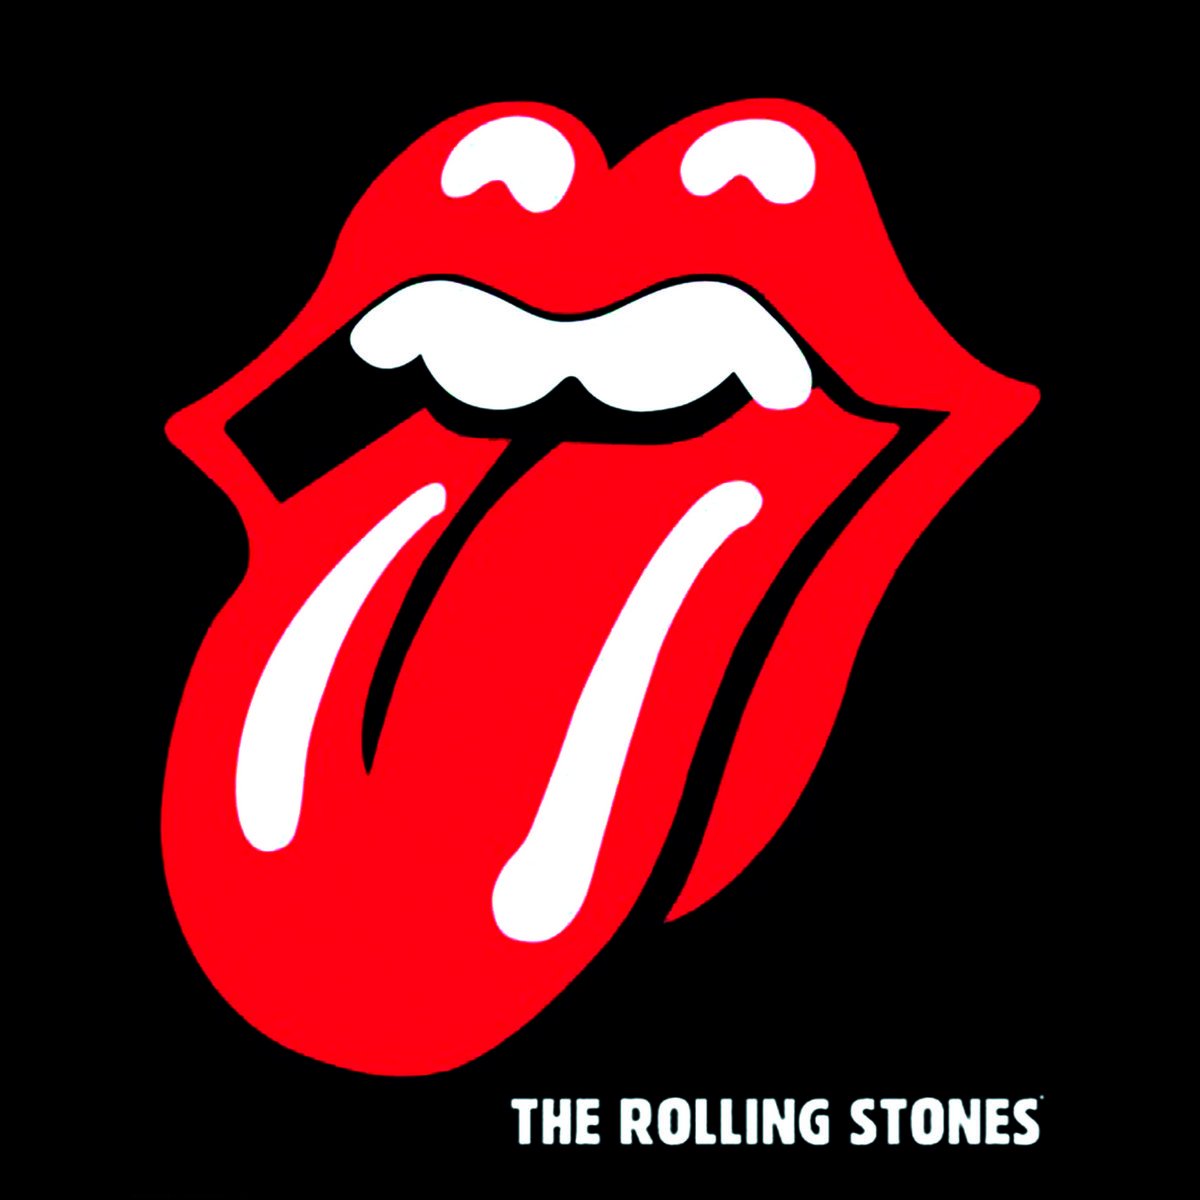 Rolling Stones logo - Rock And Roll Garage